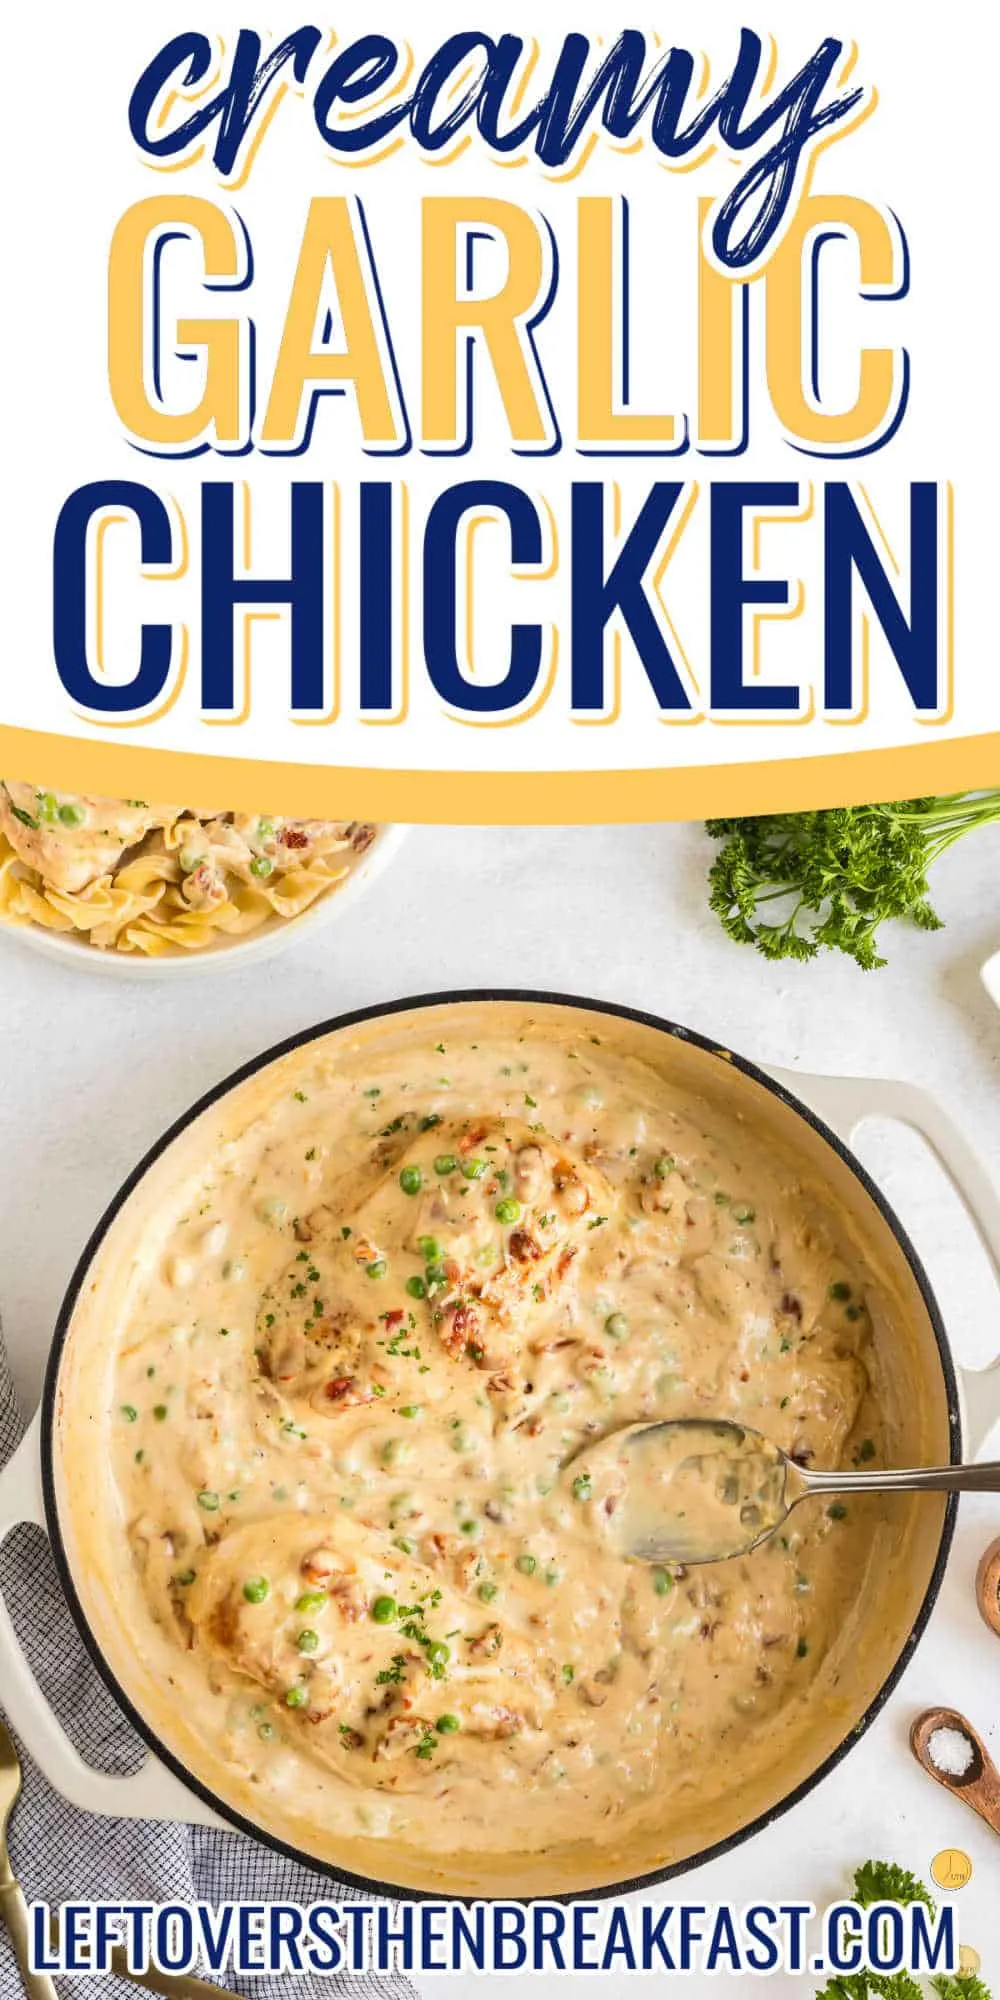 pan of chicken in a cream sauce with a spoon in it. Text "creamy garlic chicken"